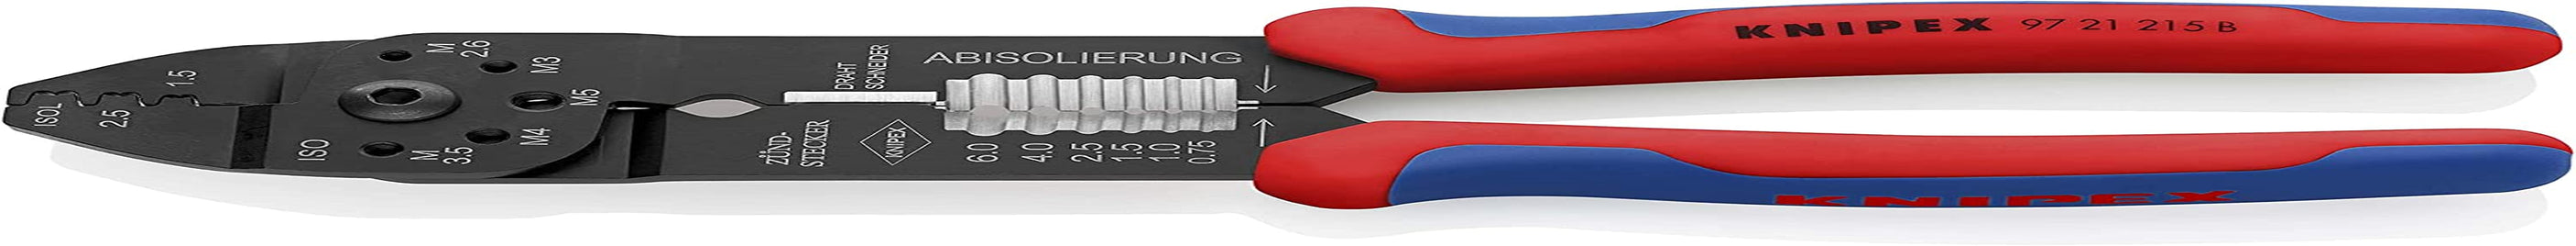 KNIPEX, Knipex 97 21 215 B Crimping Pliers for Open Plug-Type Connectors